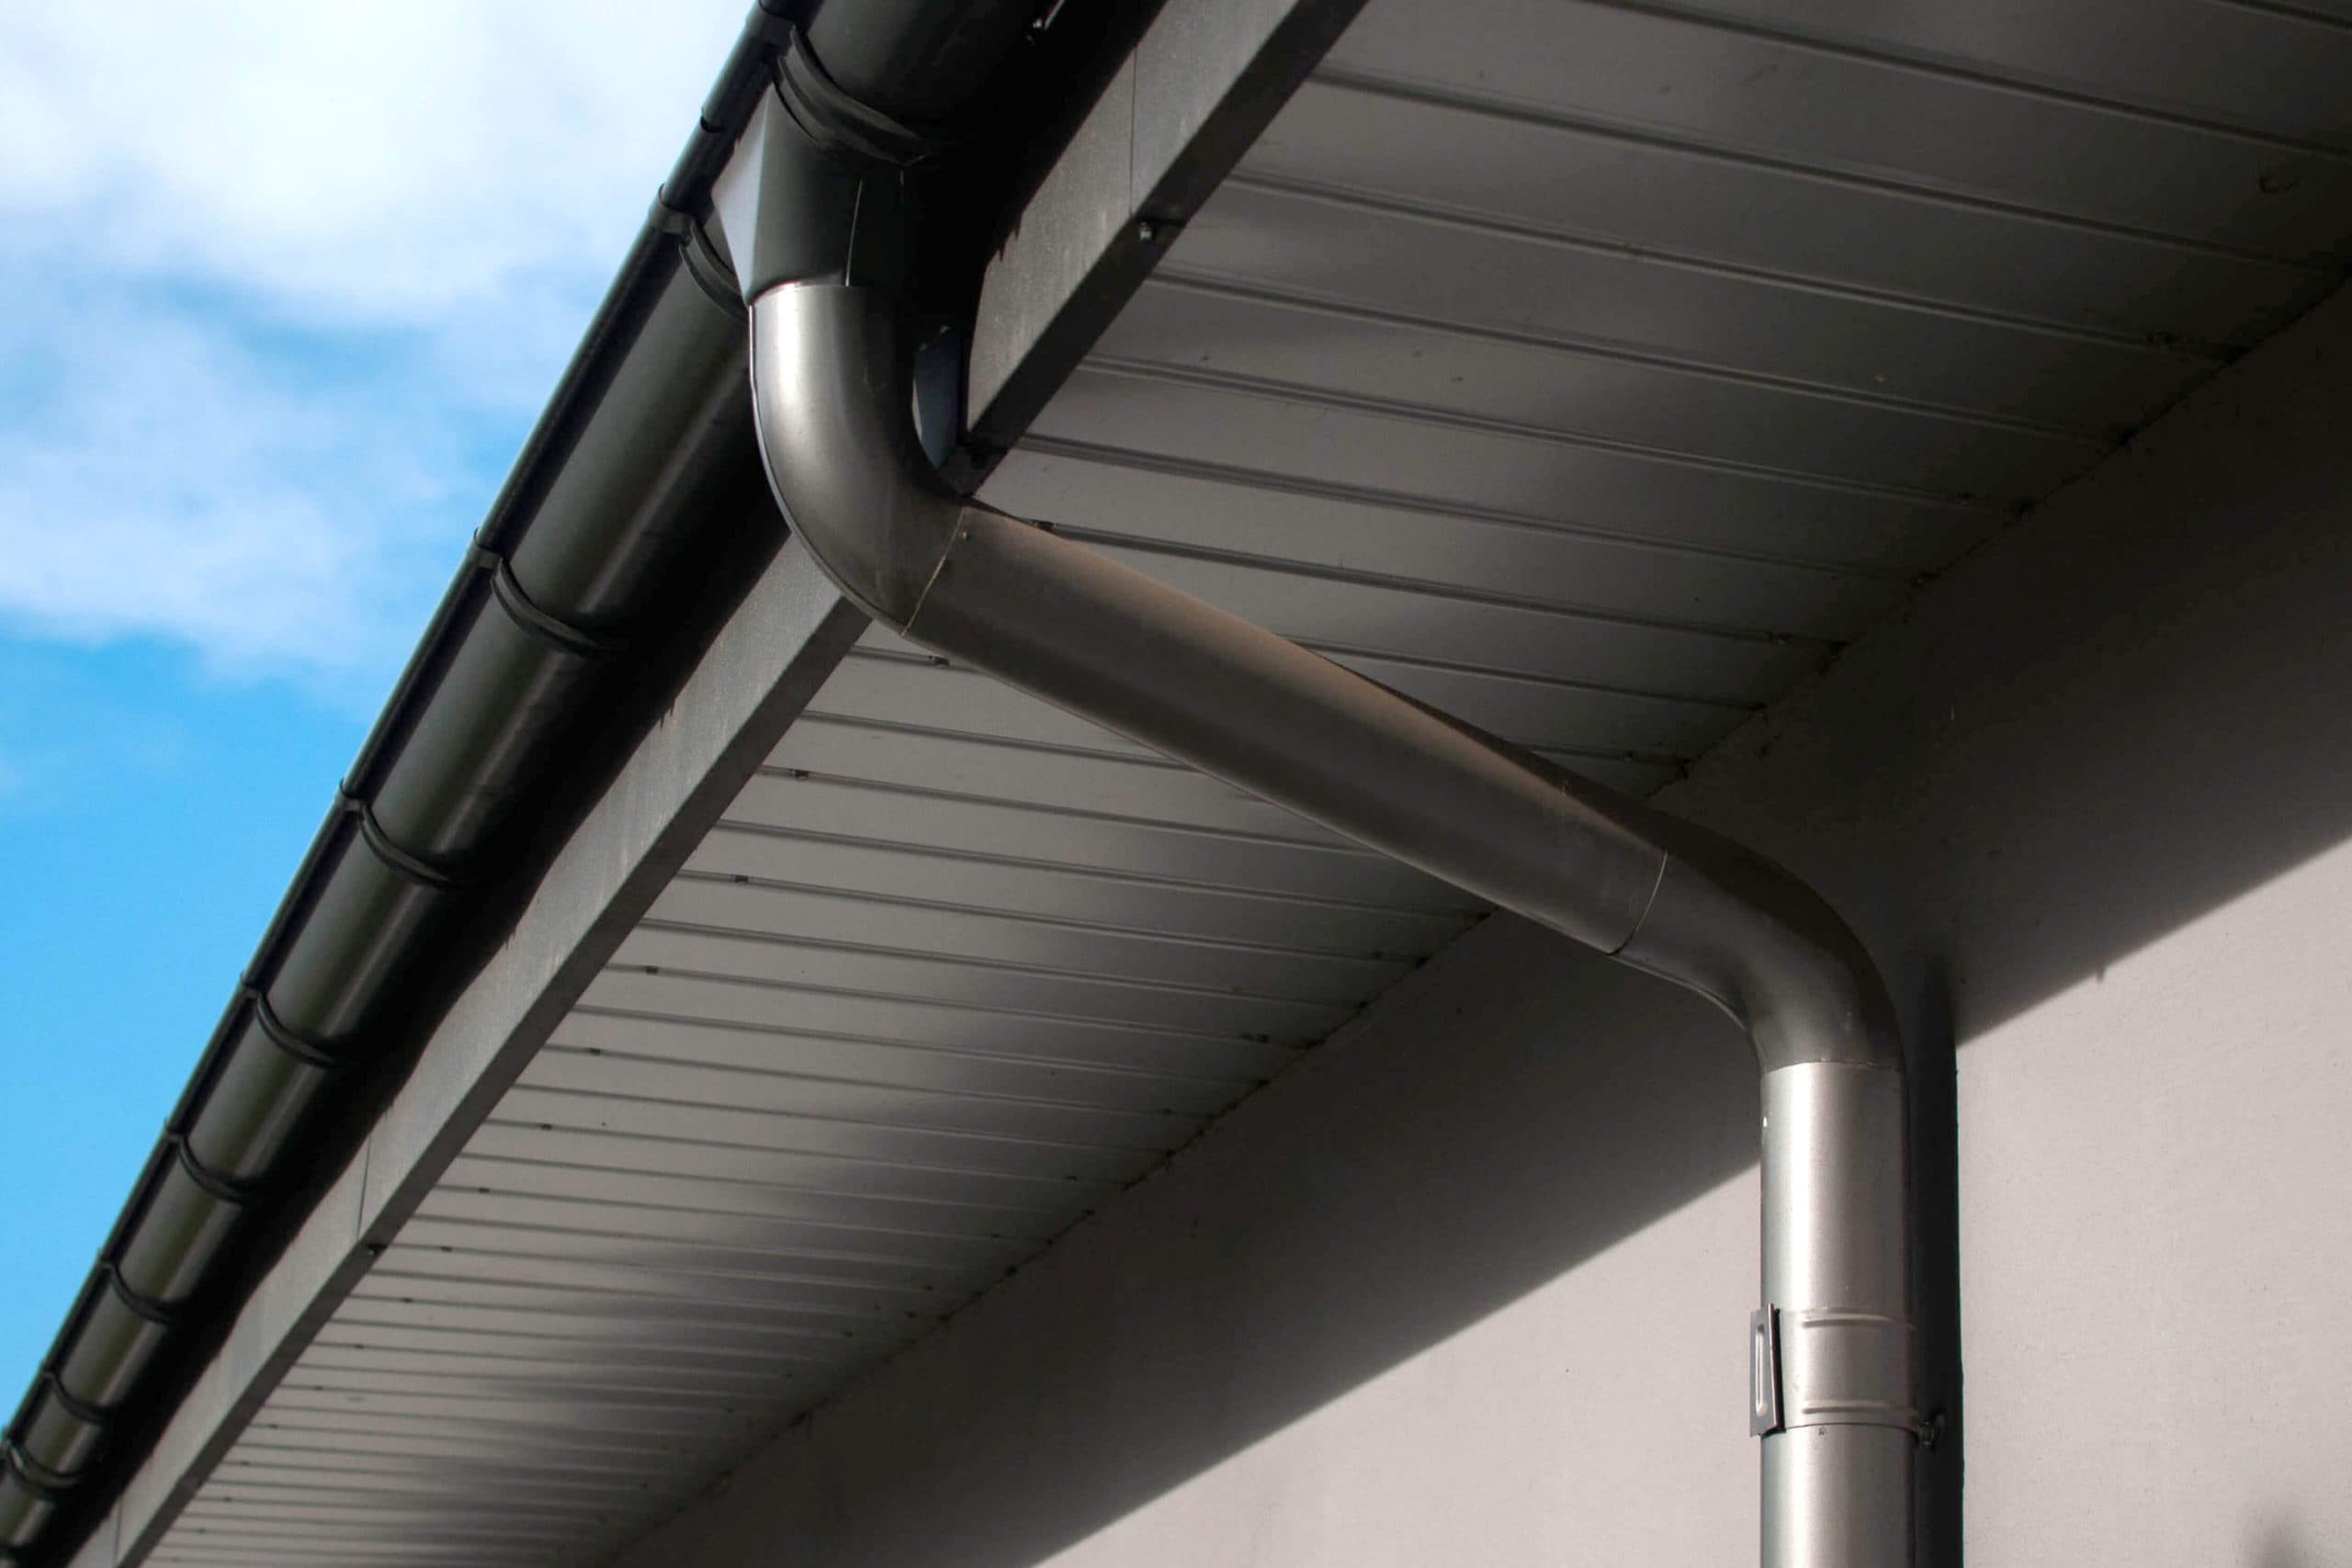 Reliable and affordable Galvanized gutters installation in Minneapolis